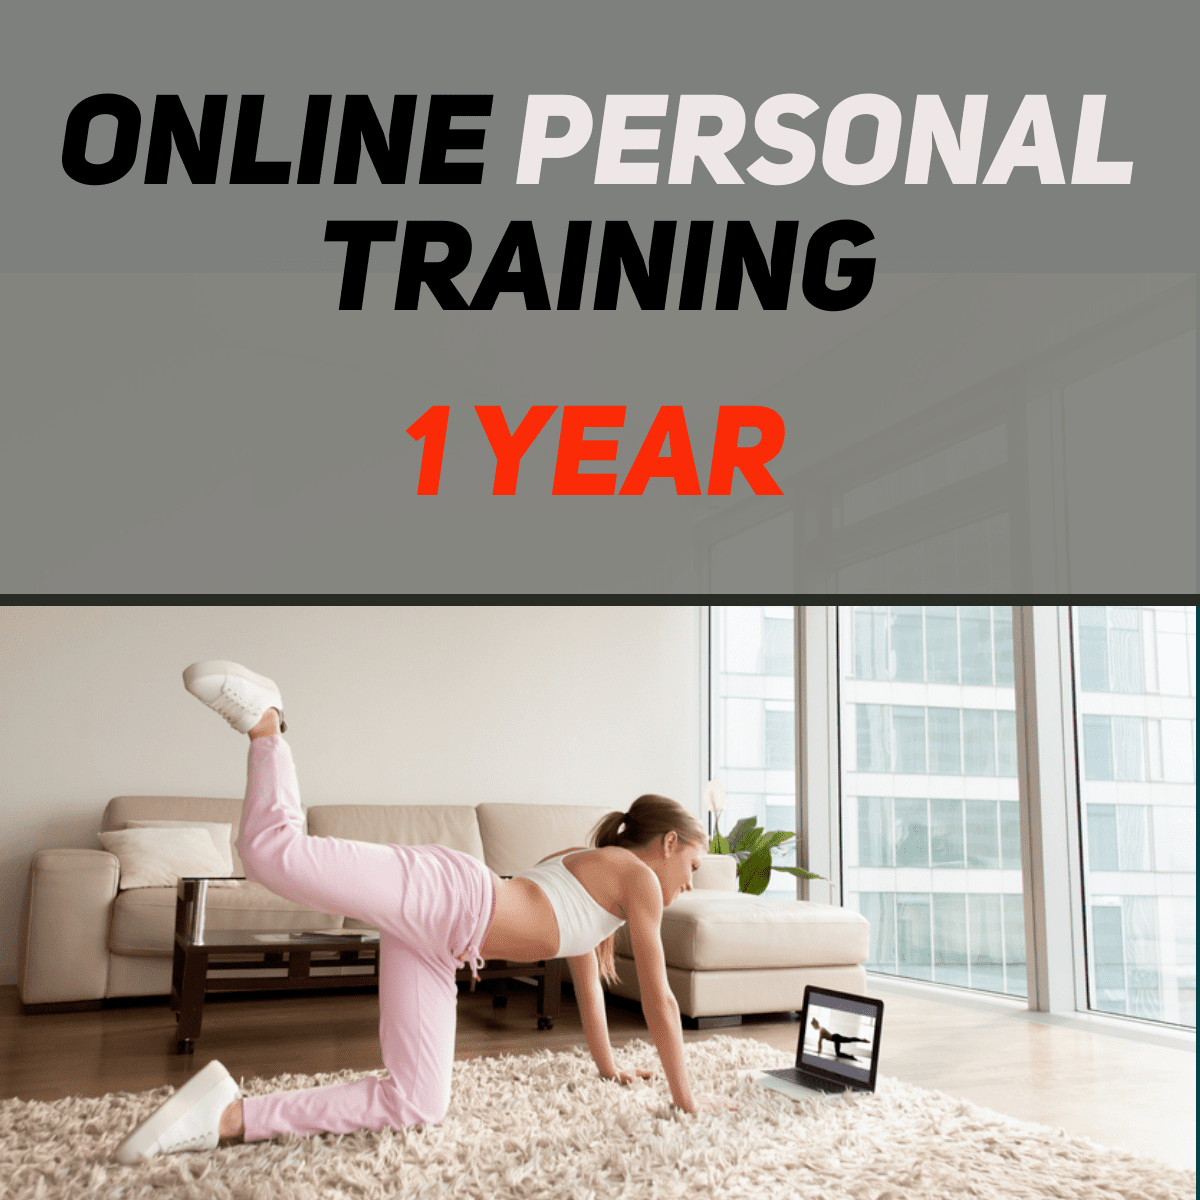 Online Personal Training 1 Year